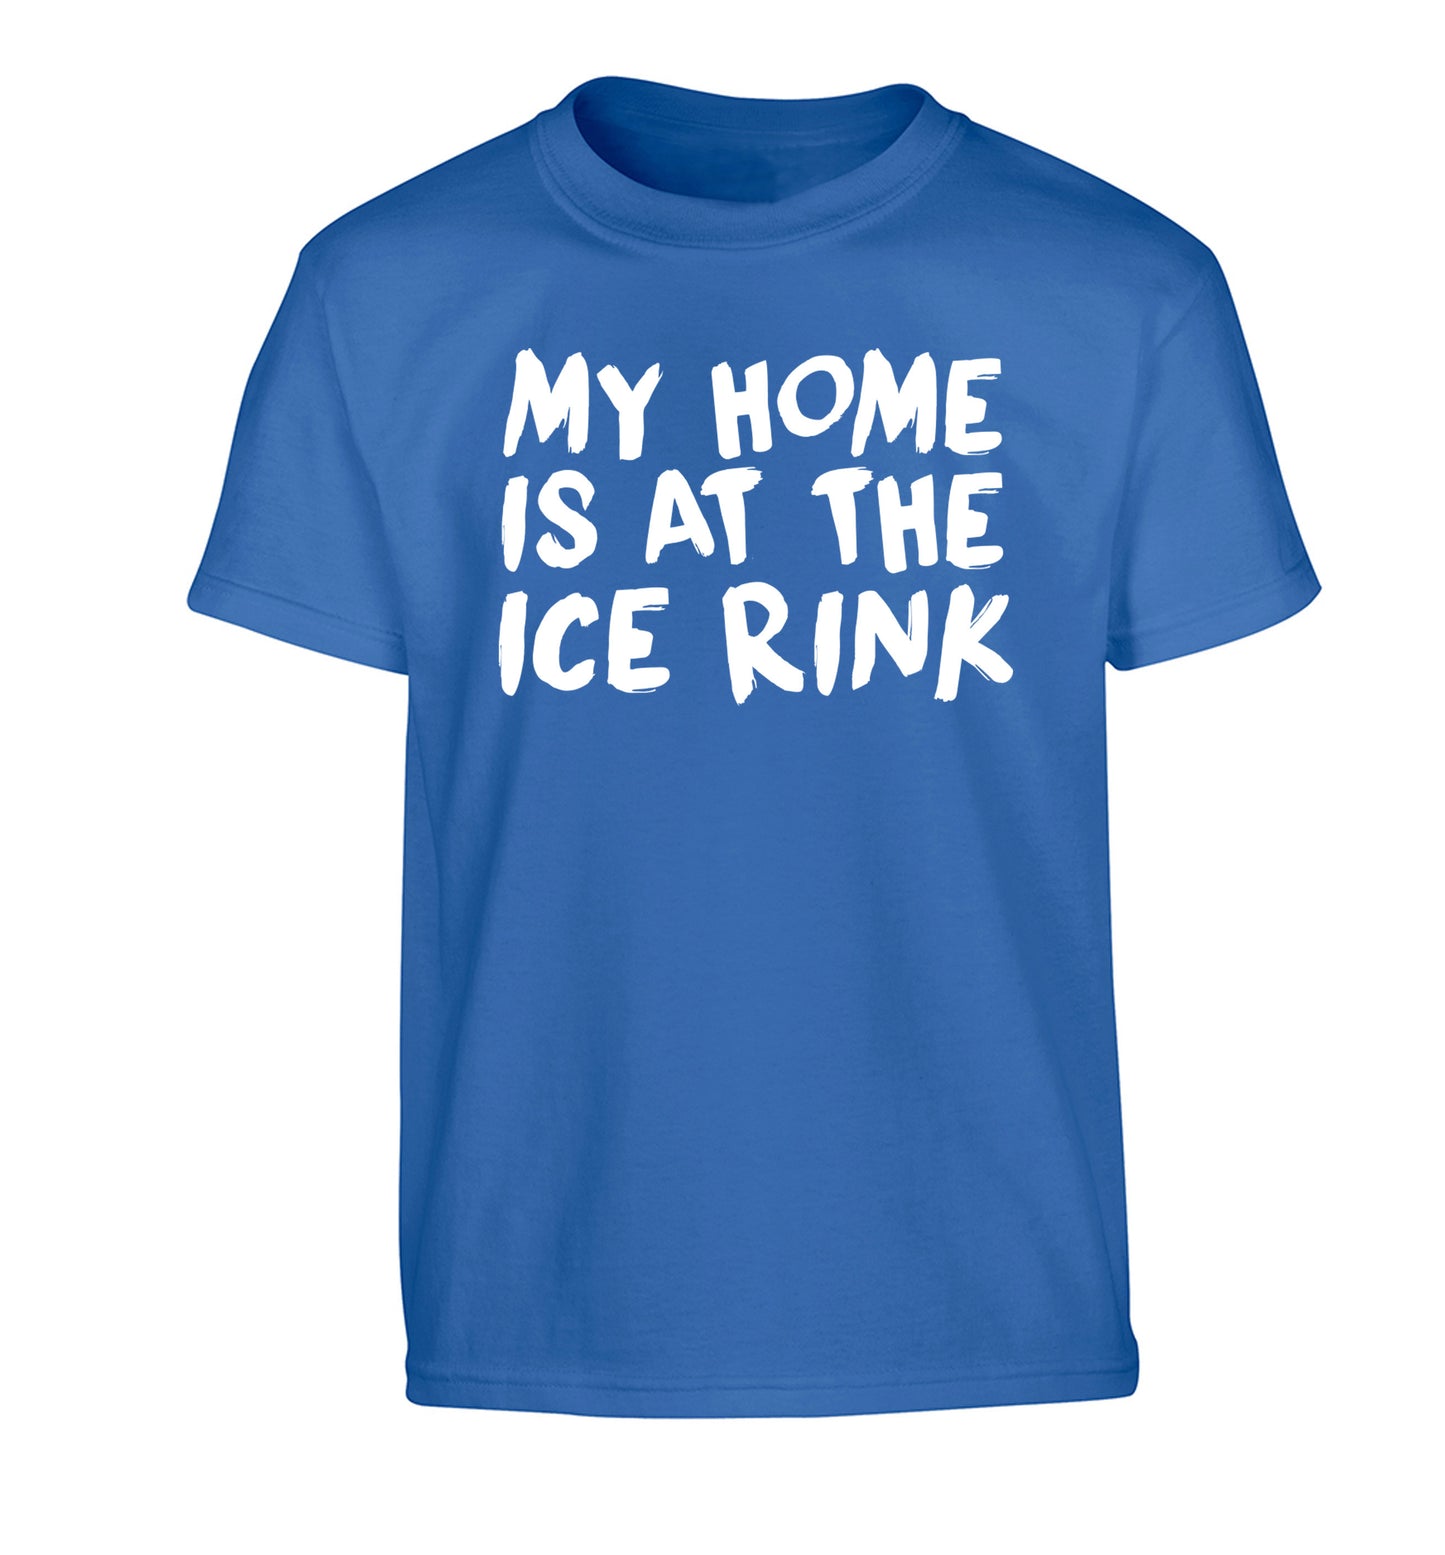 My home is at the ice rink Children's blue Tshirt 12-14 Years